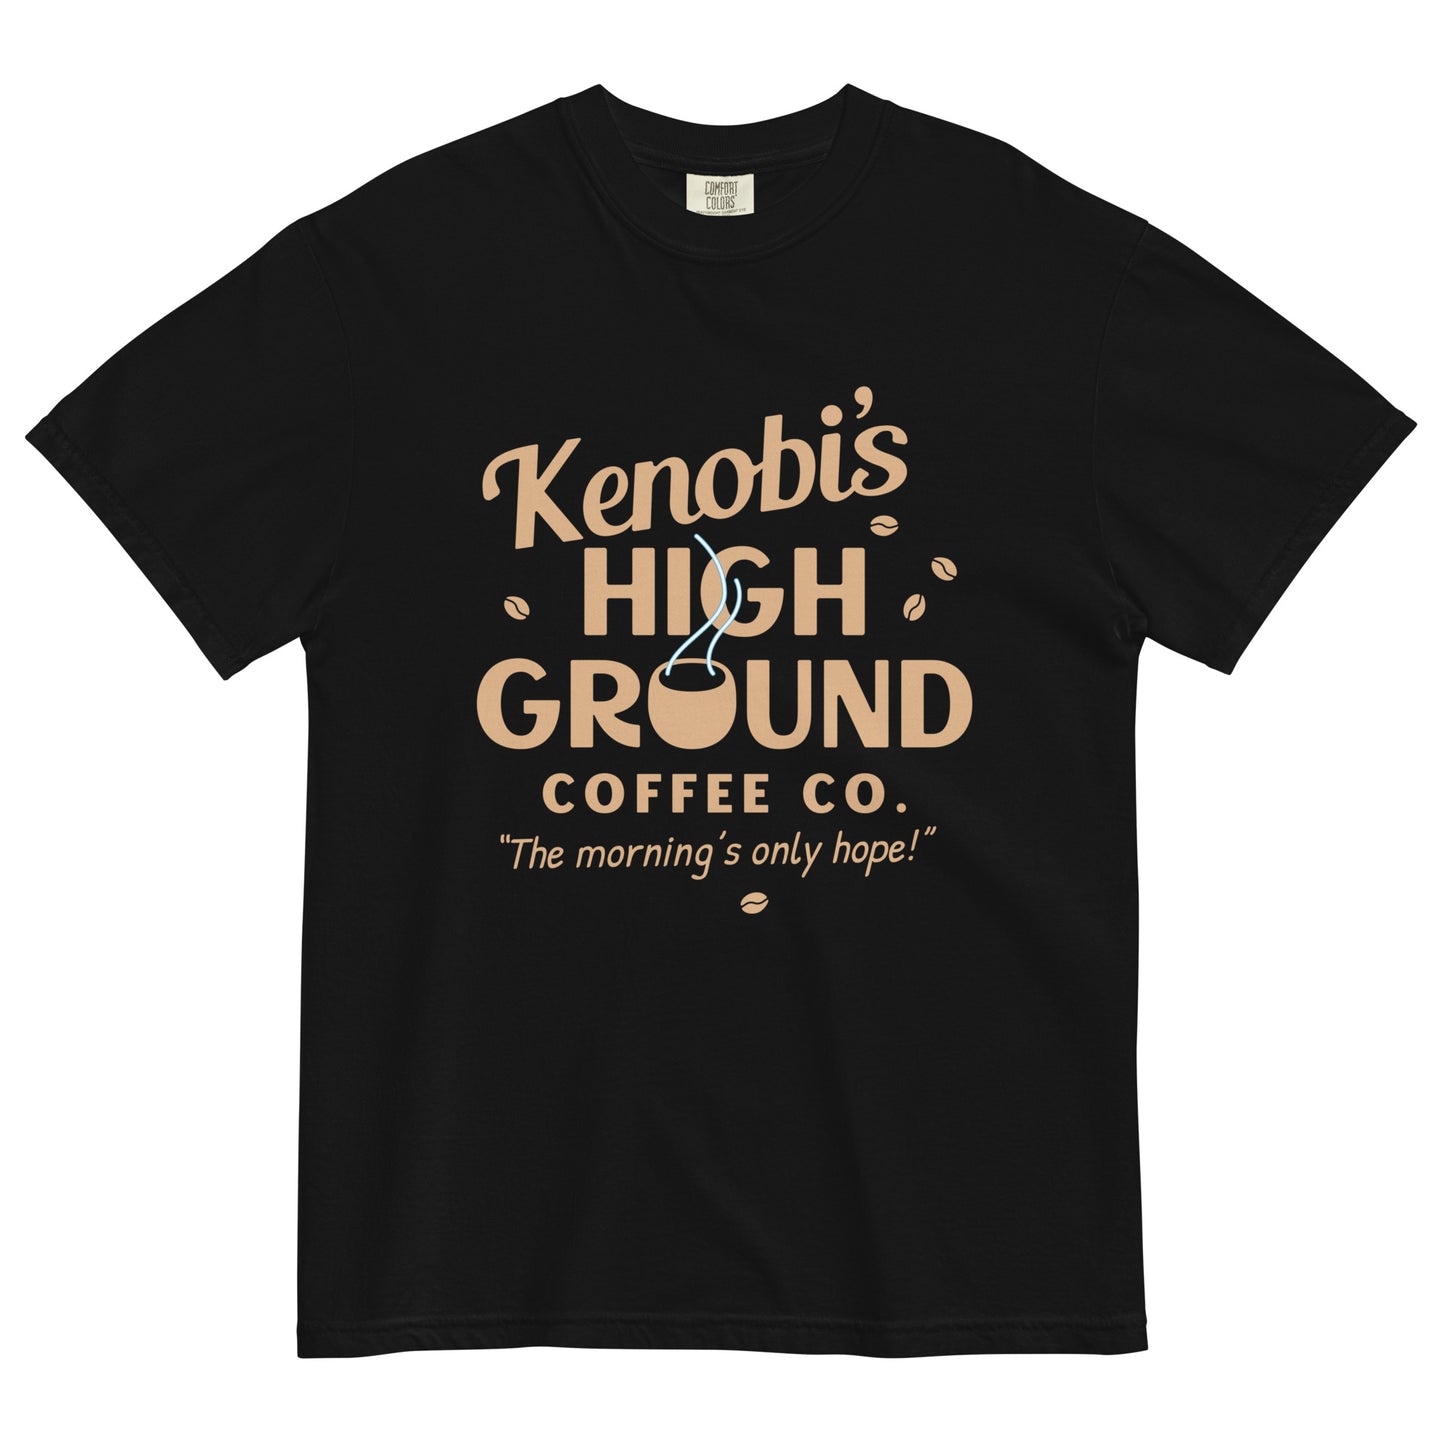 Kenobi's High Ground Coffee Co Men's Relaxed Fit Tee